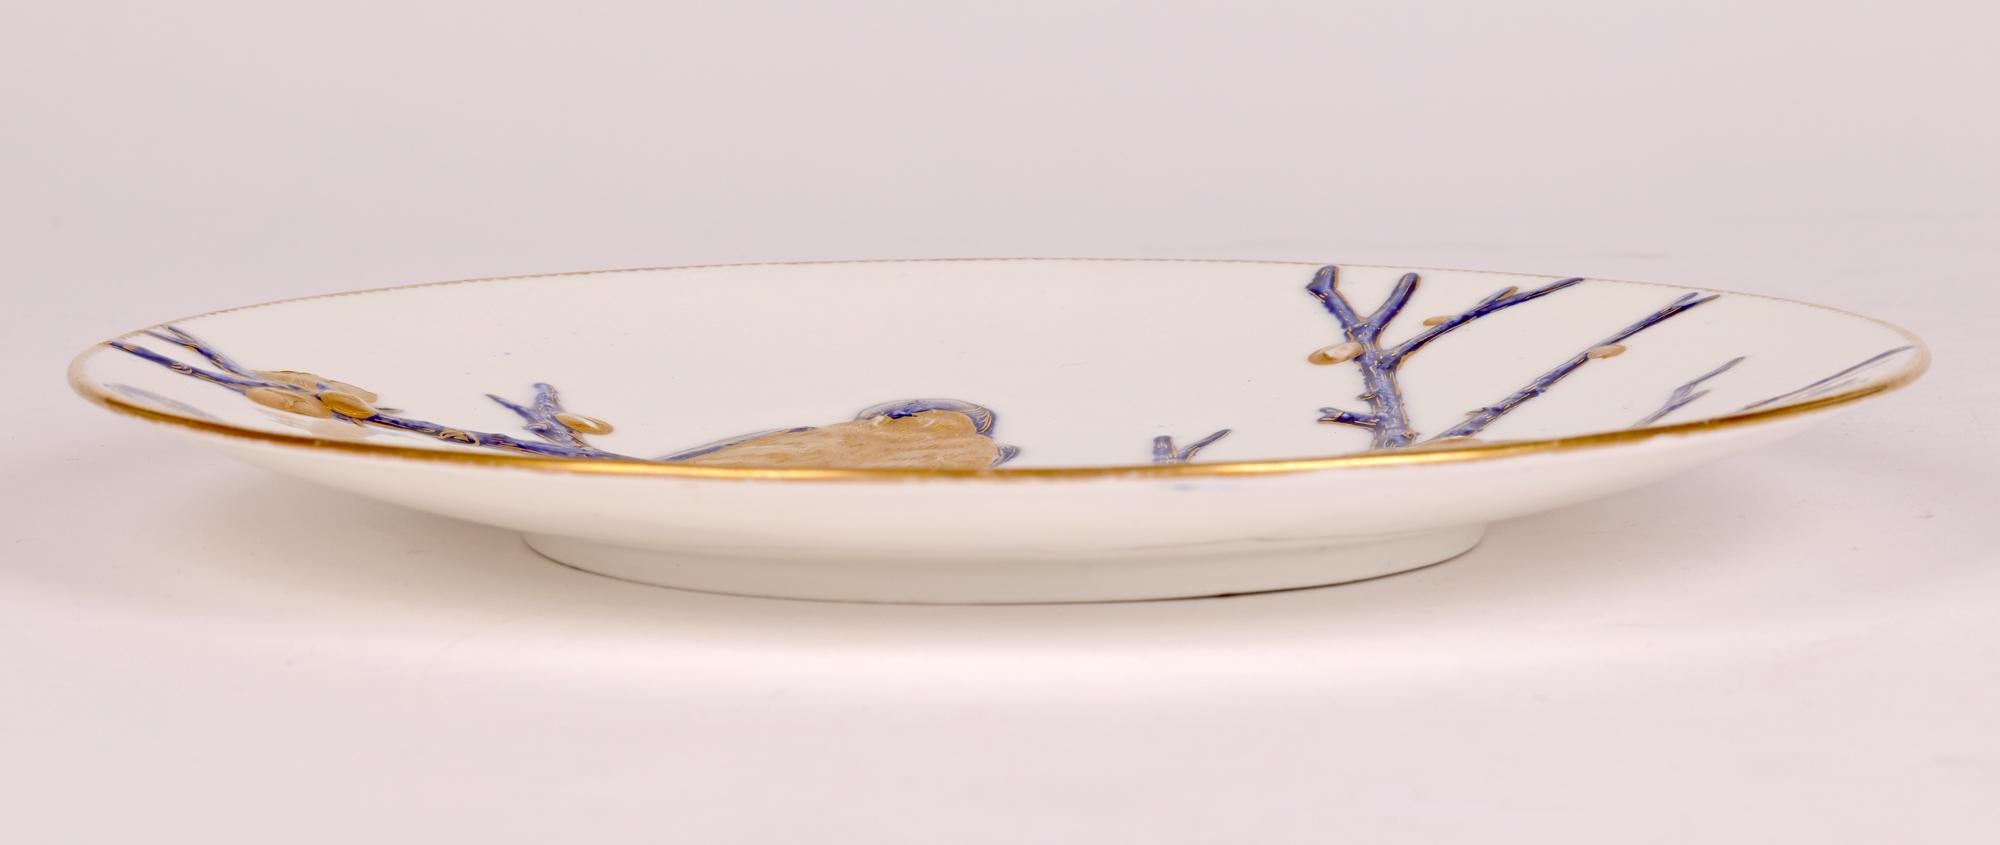 EJD Bodley Relief Molded Porcelain Cabinet Plate with Bird, 1879 9